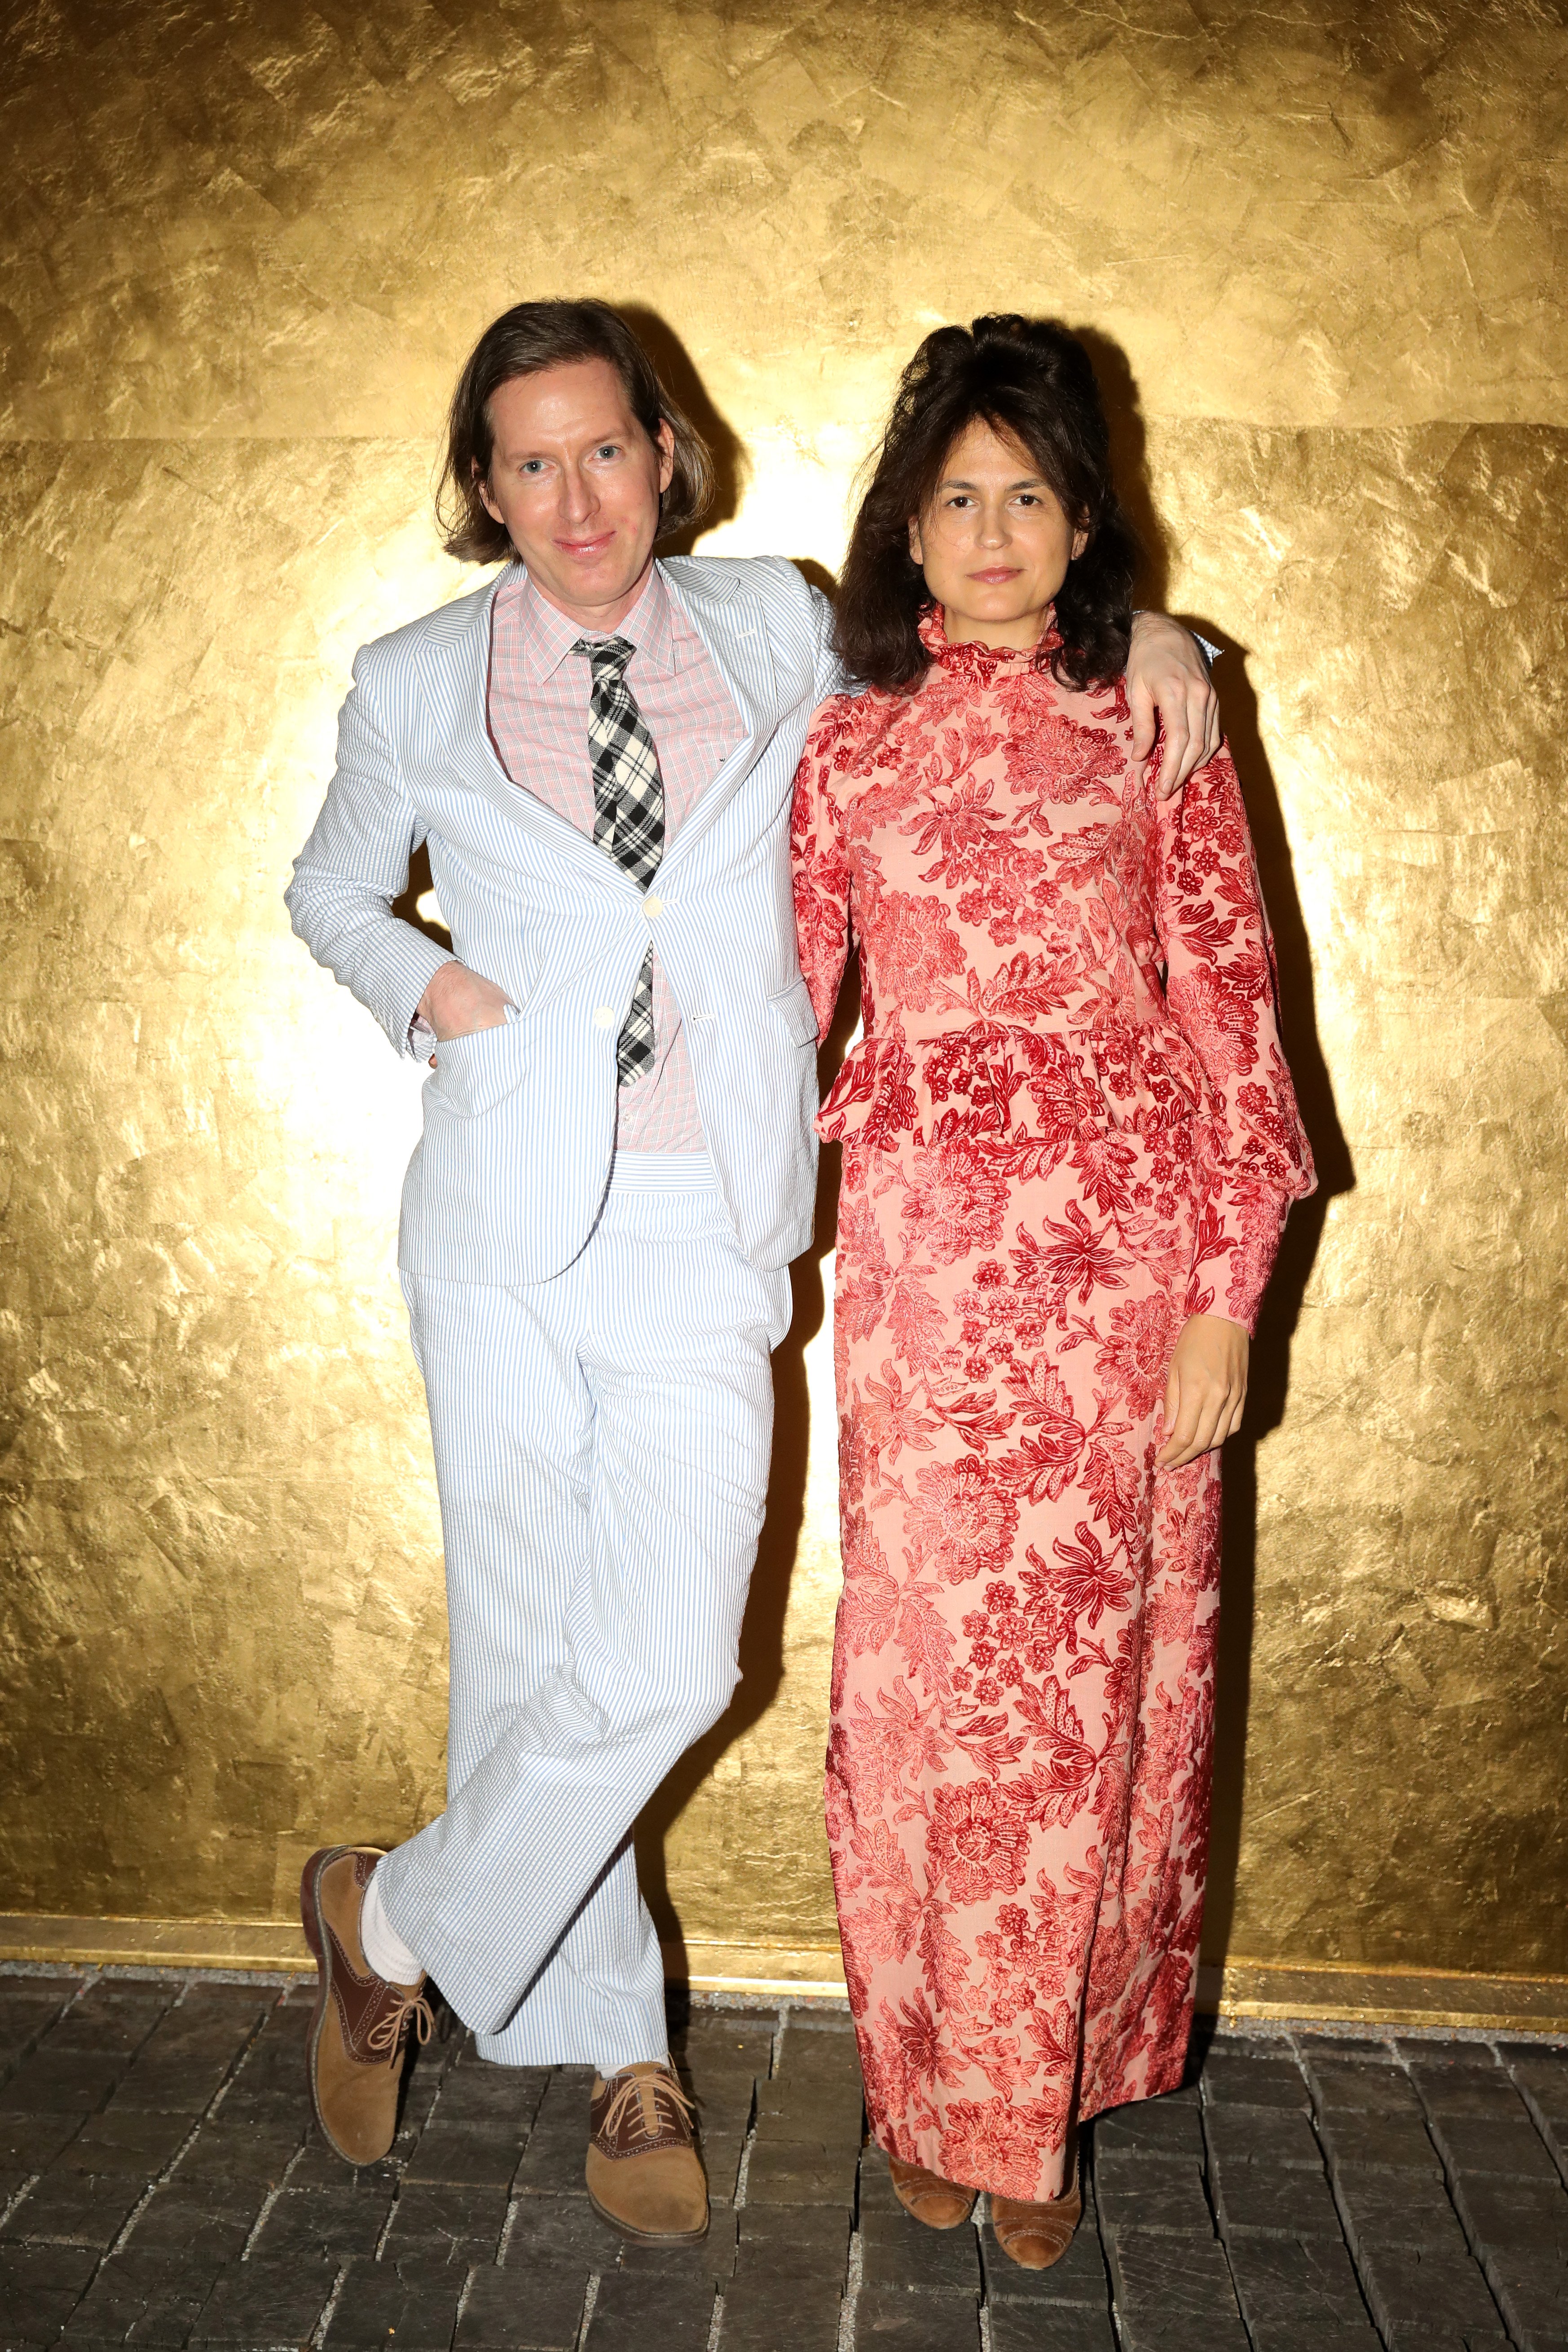  Wes Anderson and Juman Malouf at the private opening of Il Sarcofago di Spitzmaus e altri tesori exhibition on September 18, 2019 in Milan | Source: Getty Images